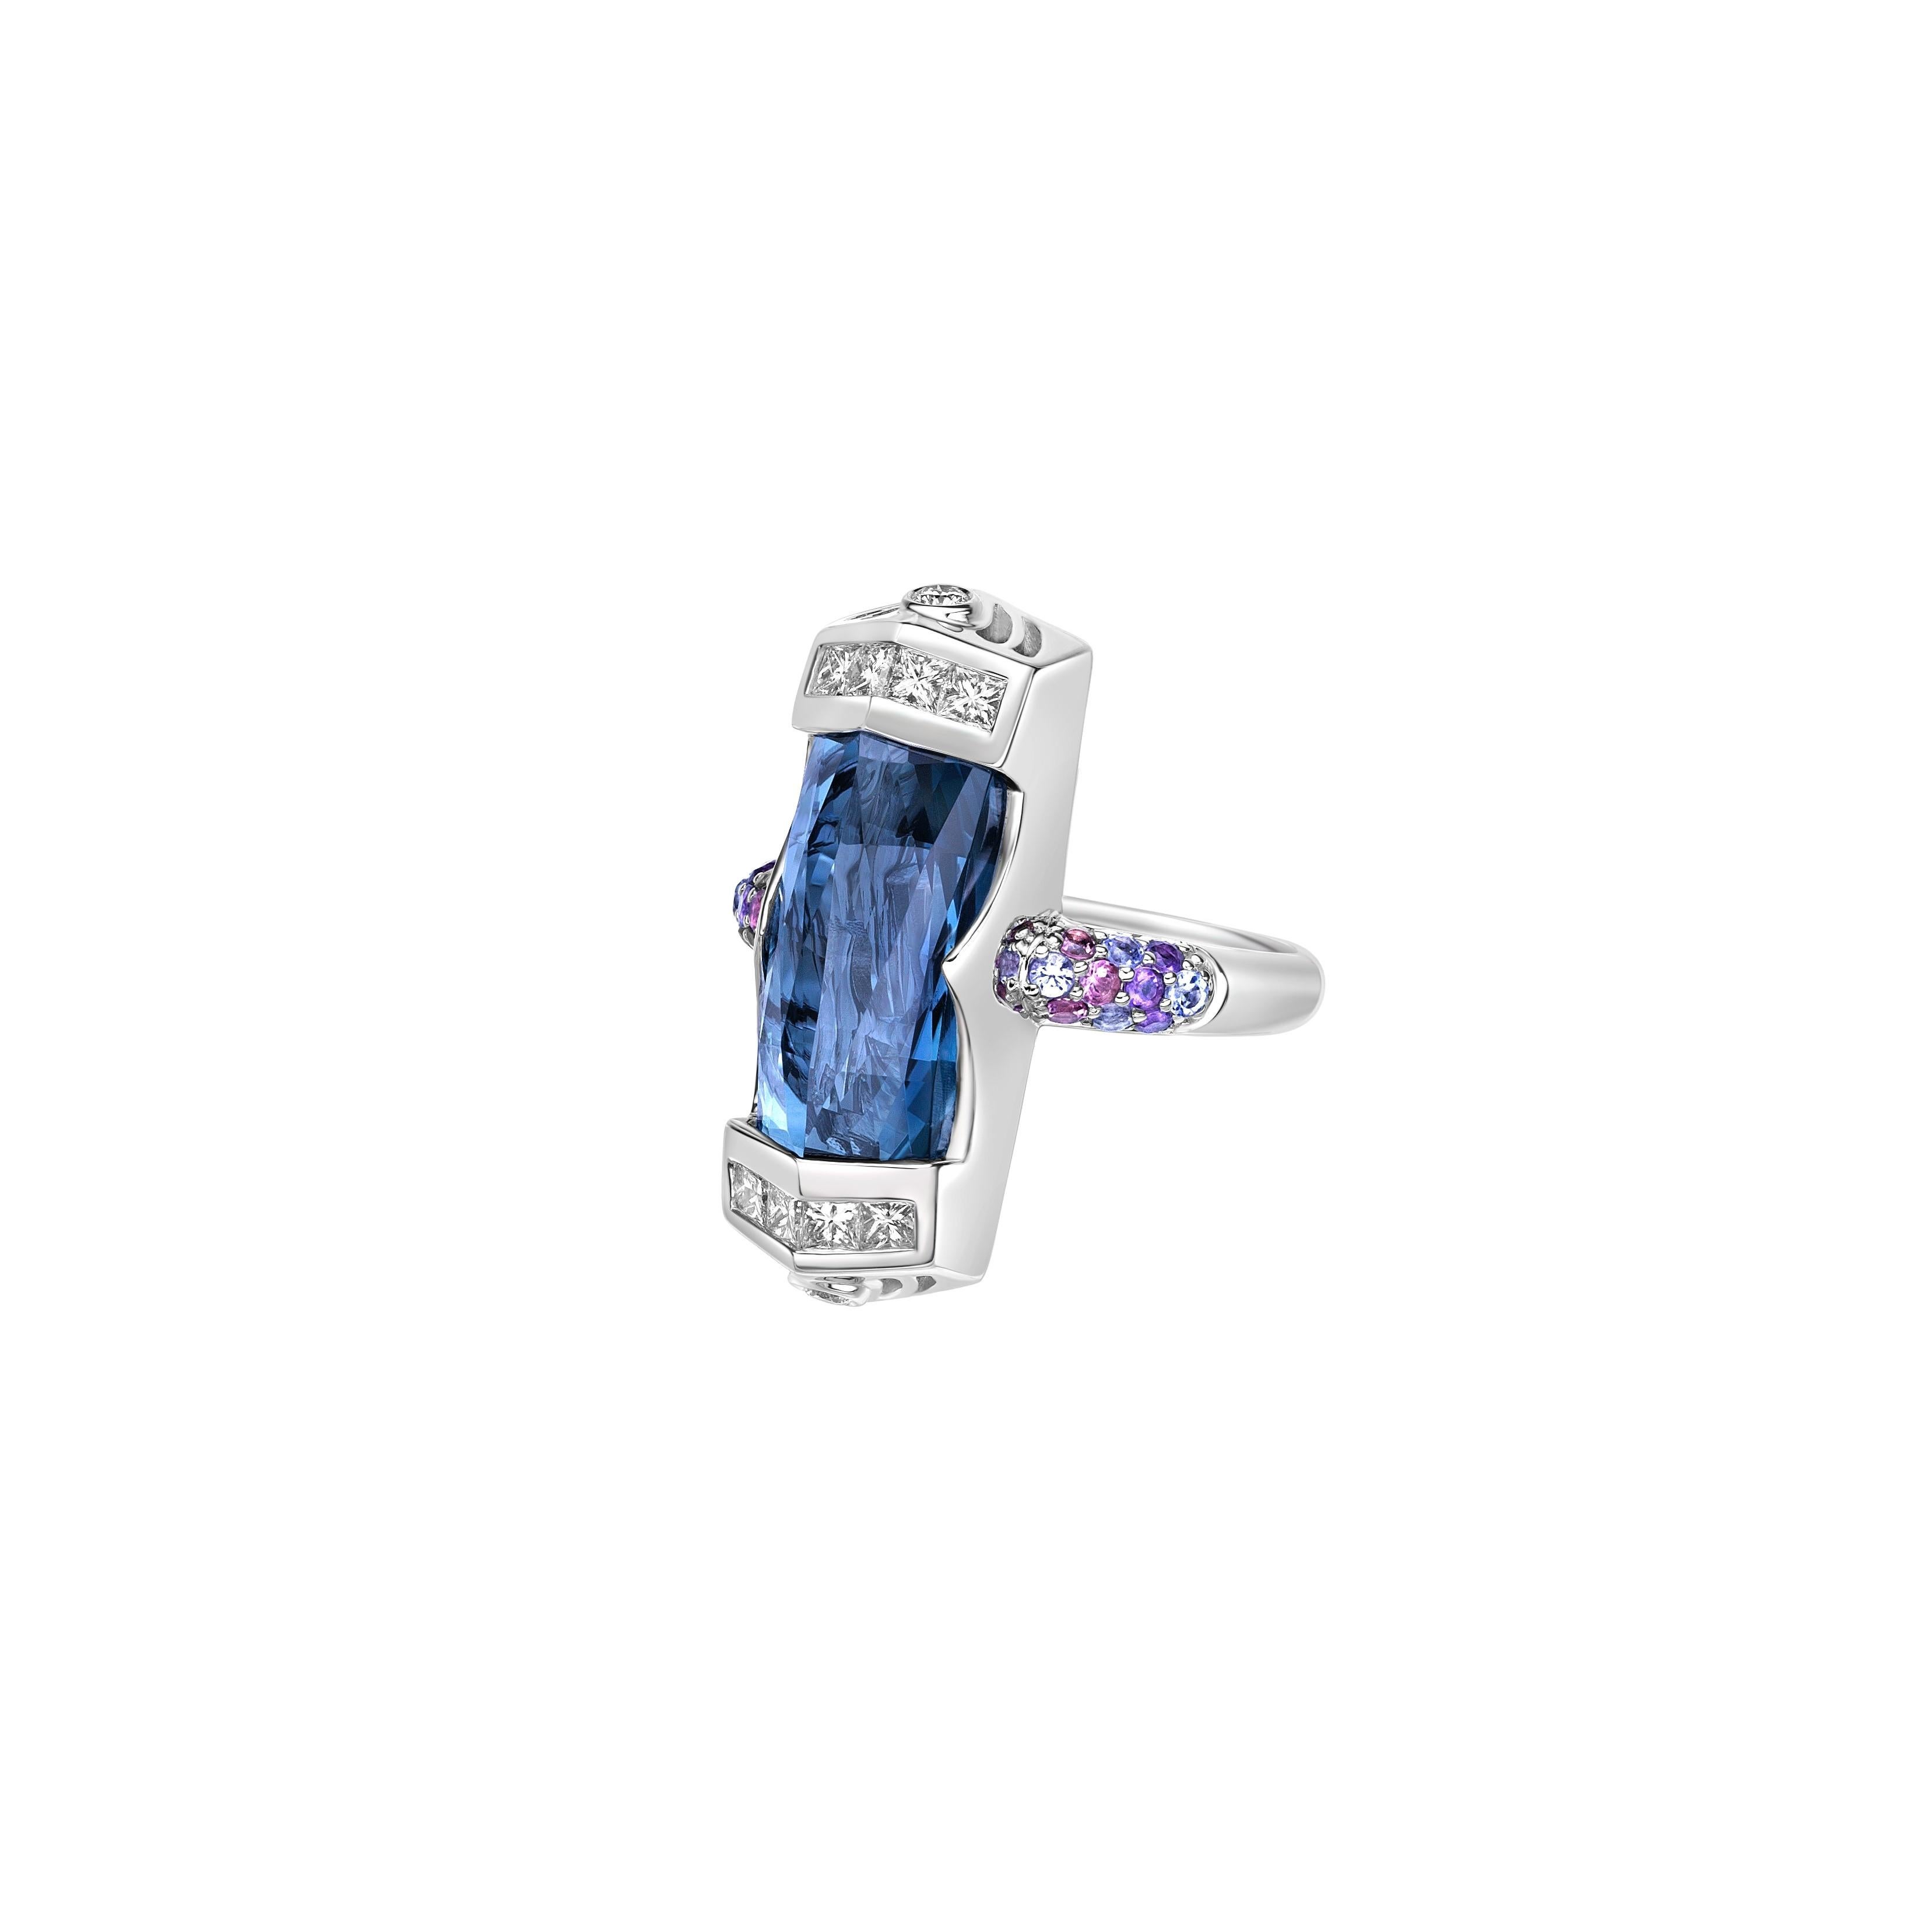 Baguette Cut 9.00Carat London Blue Topaz Cocktail Ring in 18KWG with Multi Gemstone & Diamond For Sale